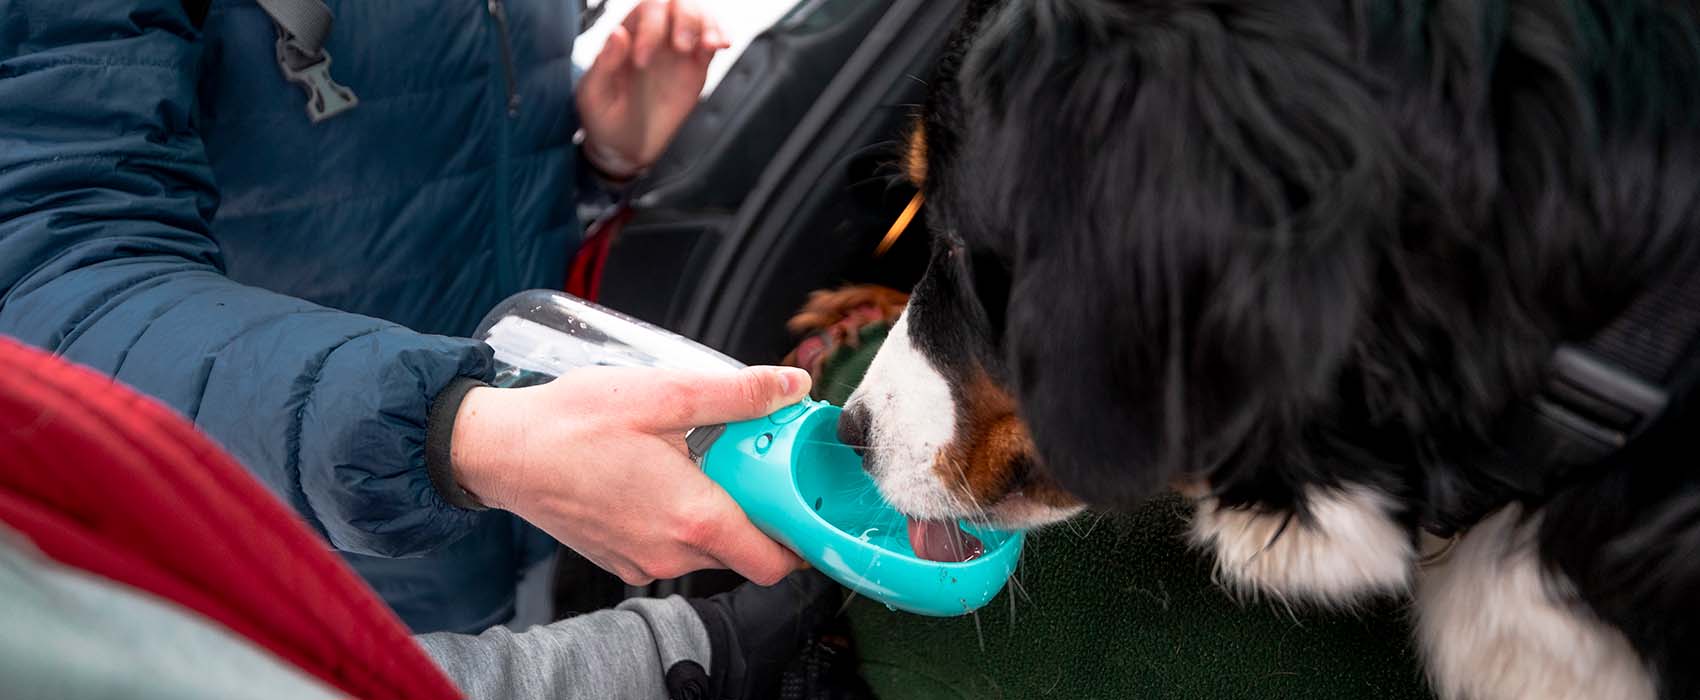 Dog drinks from portable pet water bottle while in backseat of car in winter.